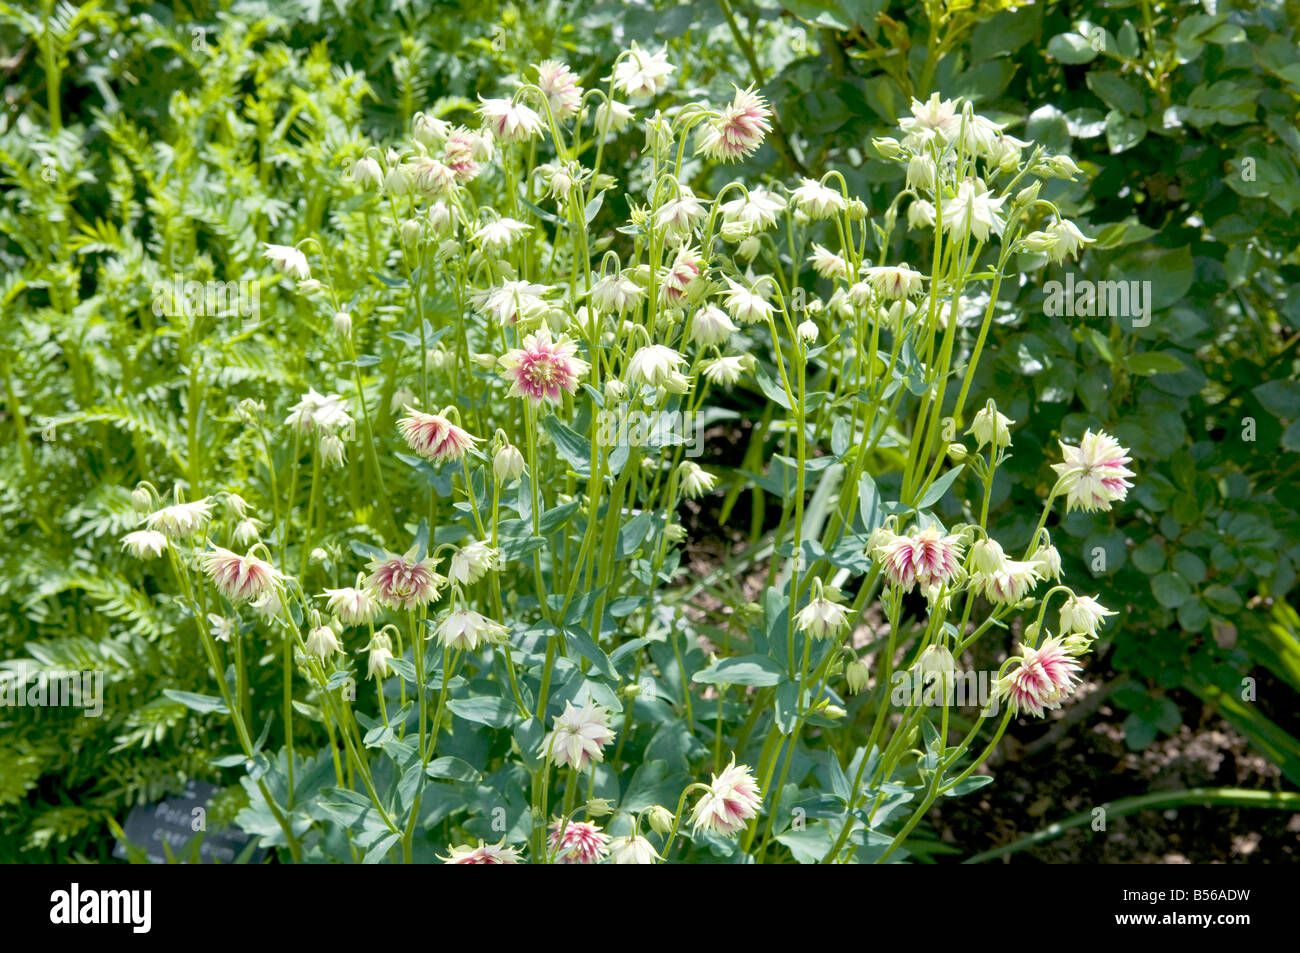 Aquilegia Vulgaris High Resolution Stock Photography And Images Alamy